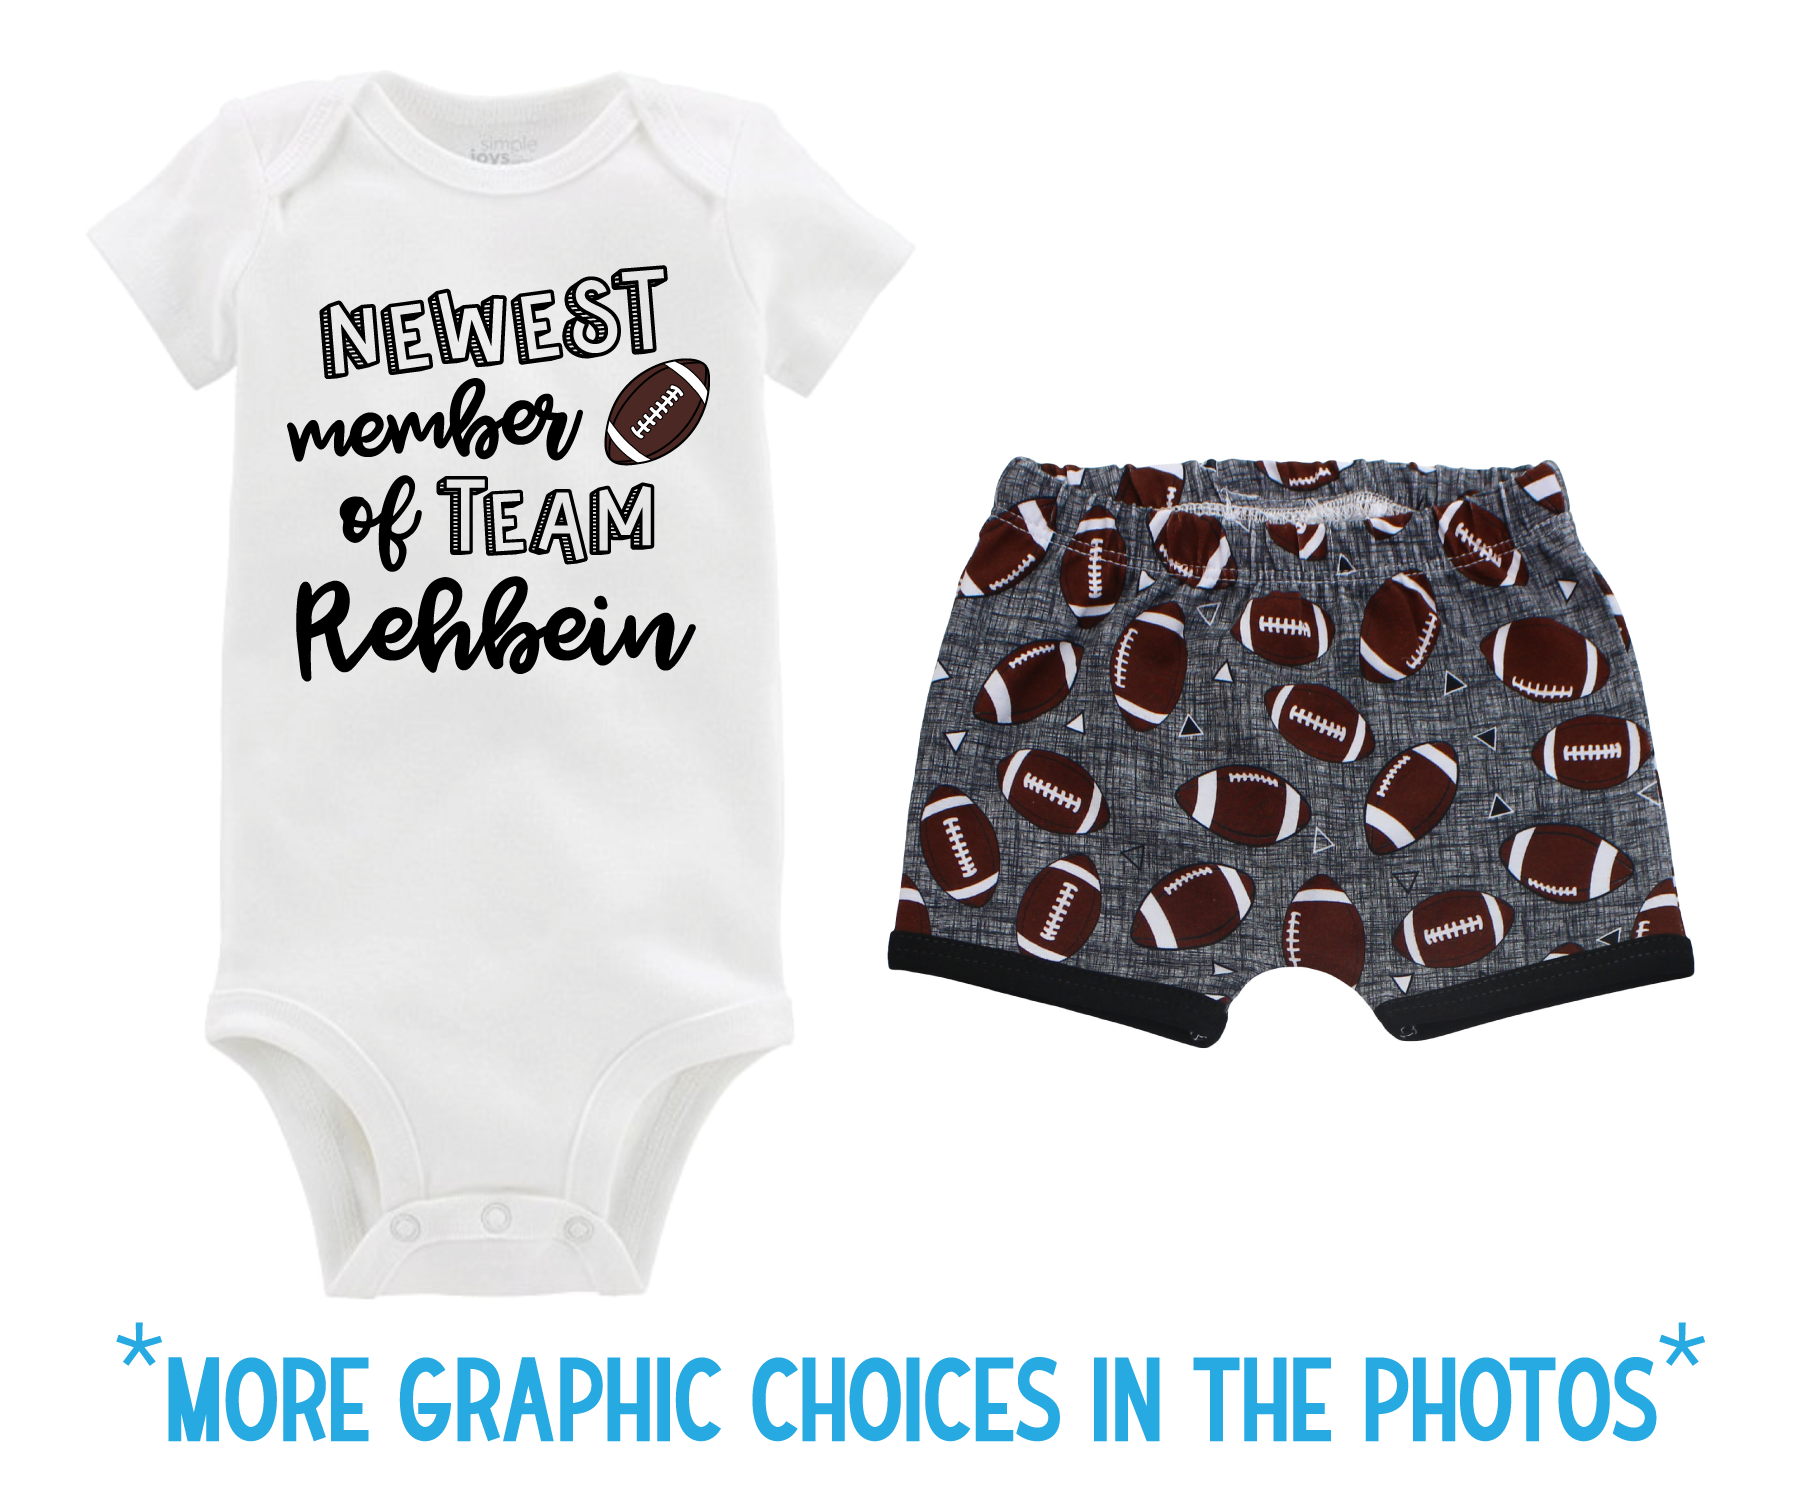 Baby Boy Football Short Outfit